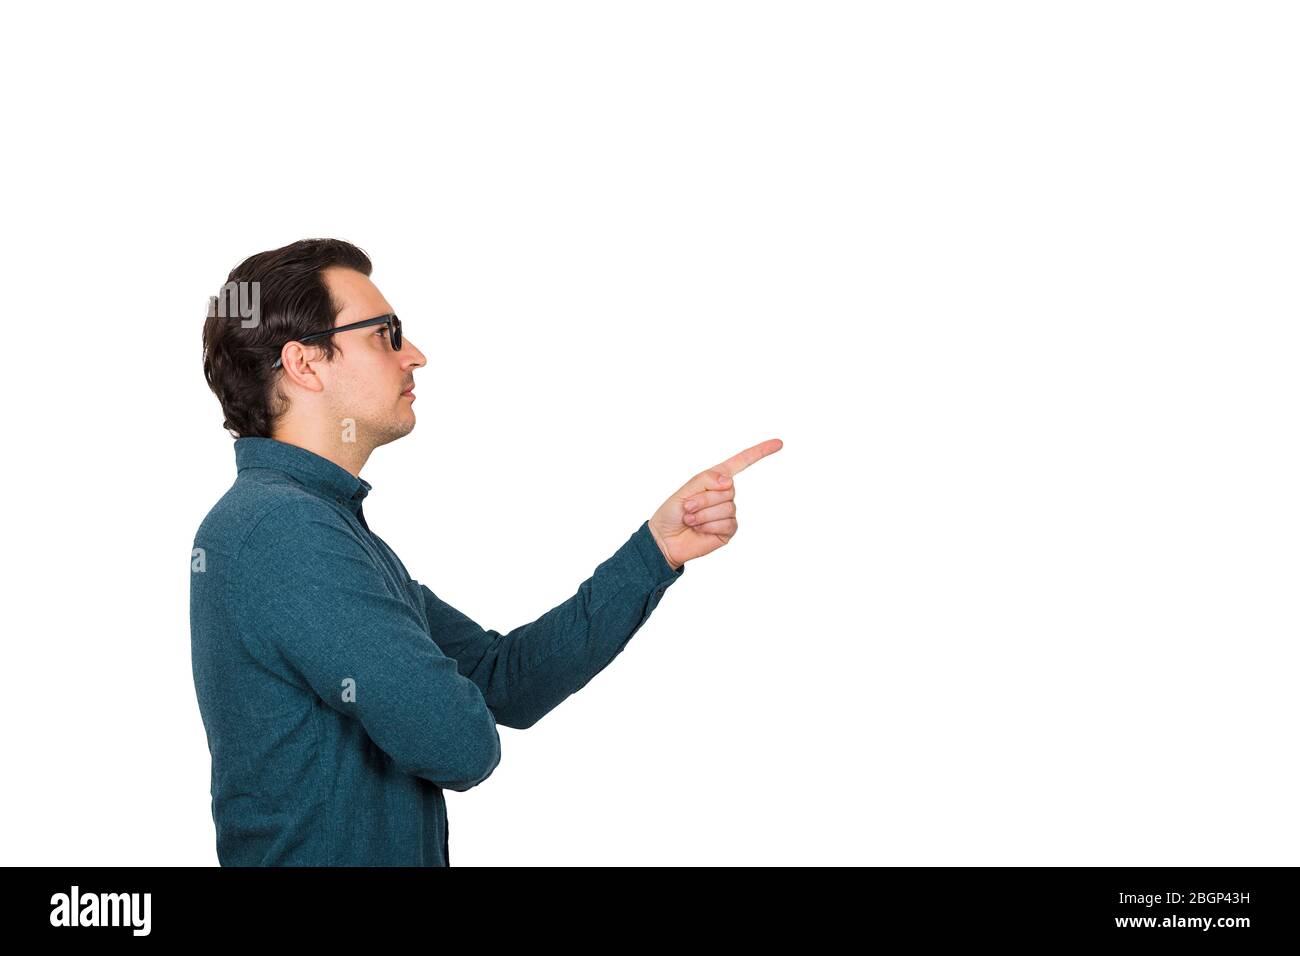 Side view of angry businessman pointing index finger blaming someone as guilty or choosing something, isolated on white background with copy space. Se Stock Photo